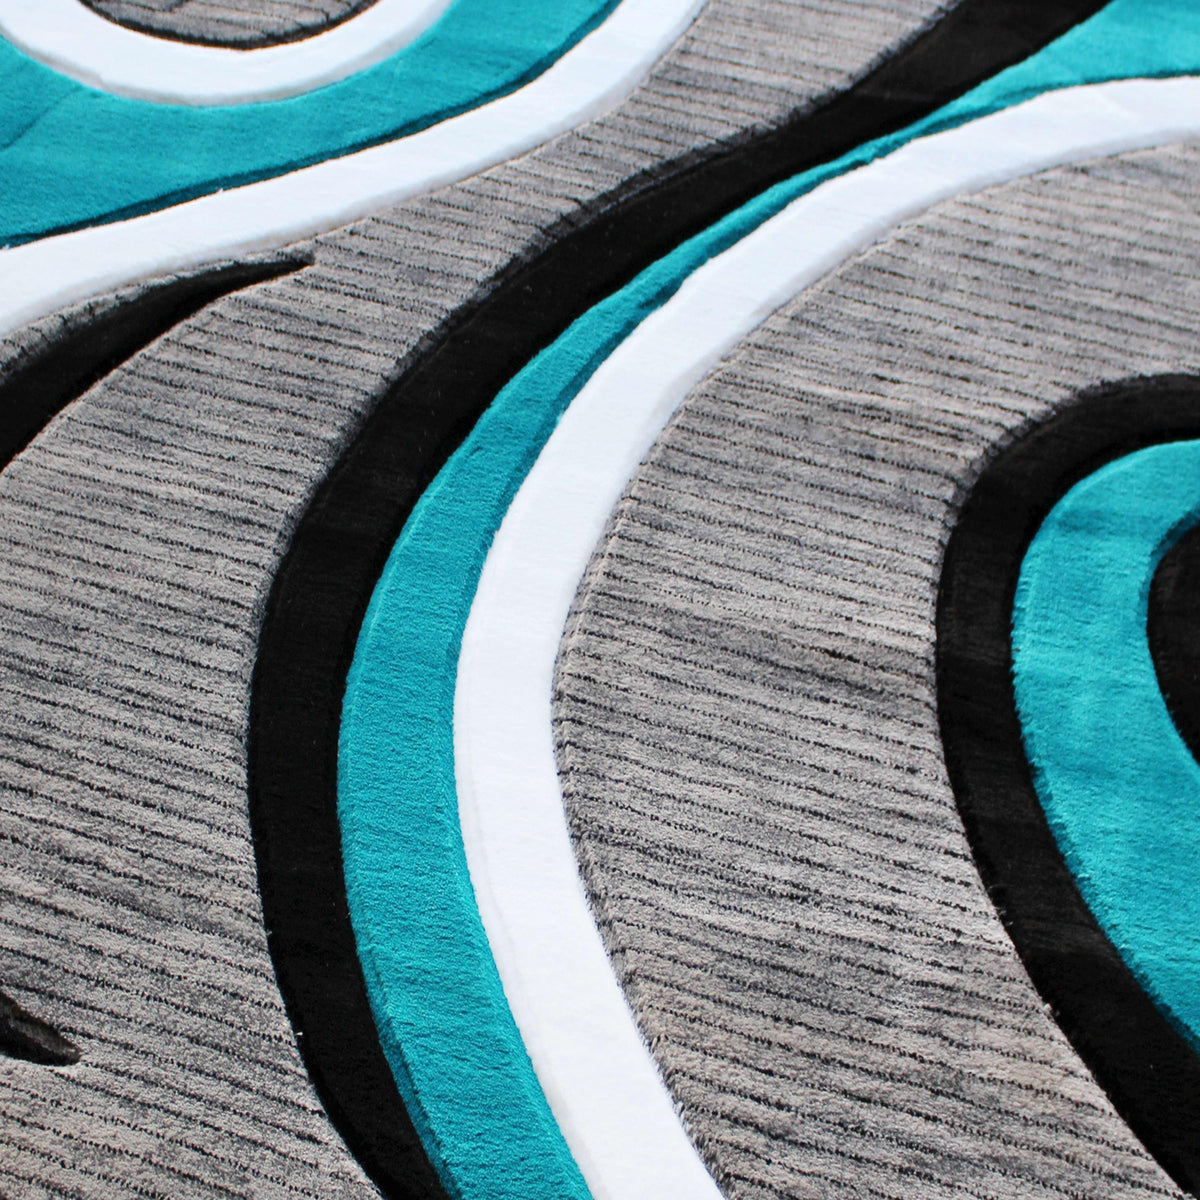 Turquoise,4' Round |#| Modern High-Low Sculpted Swirl Design Abstract Area Rug - Turquoise - 4' x 4'